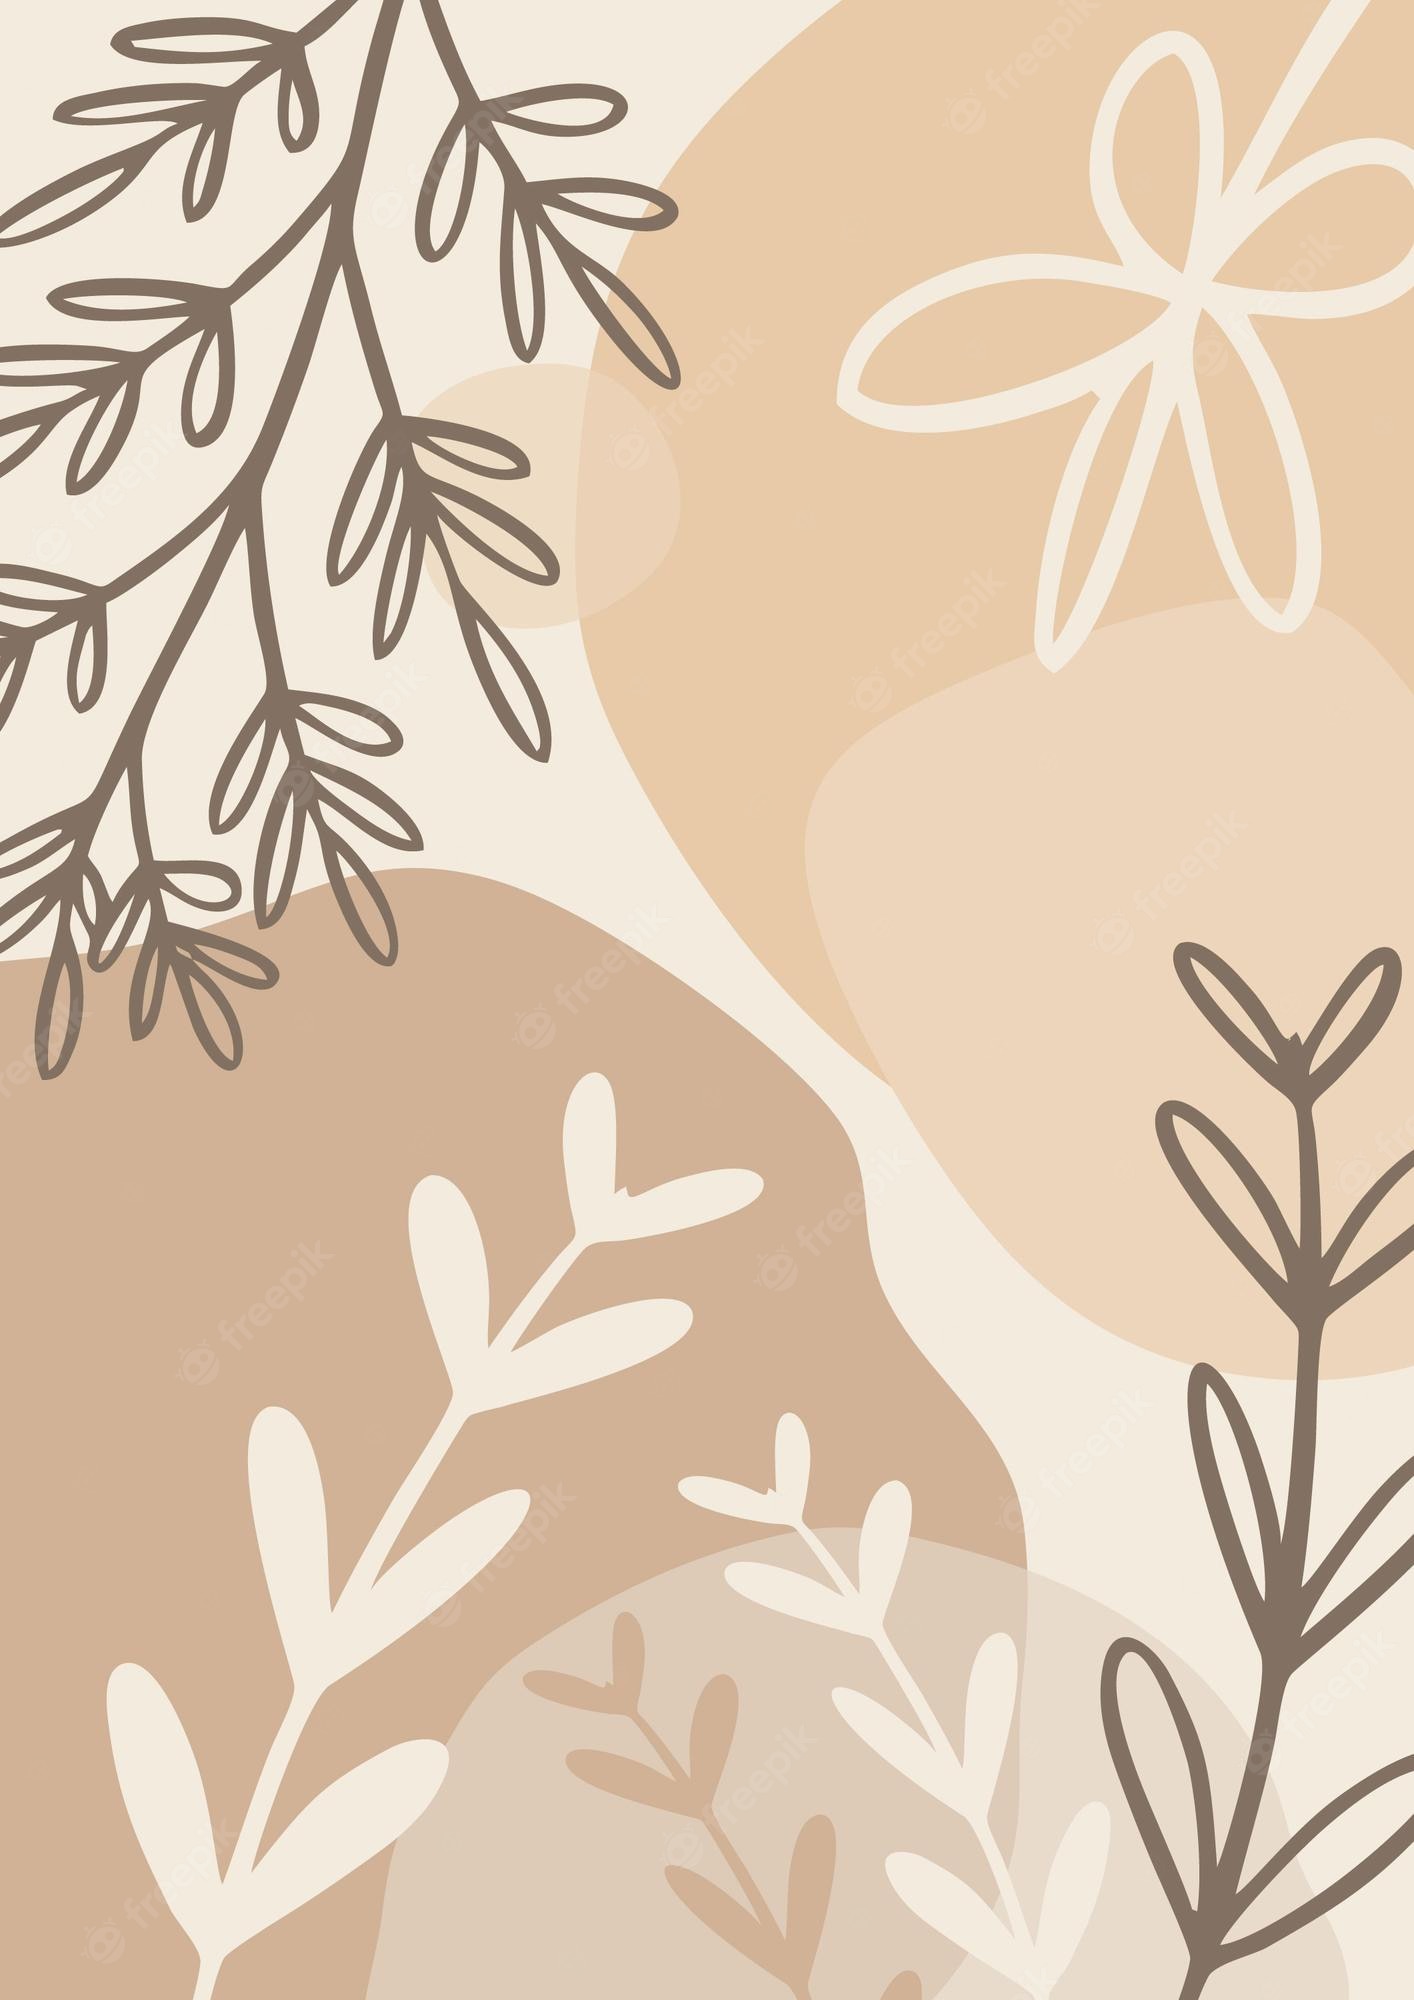 An abstract illustration of leaves and flowers on a beige background - Pastel minimalist